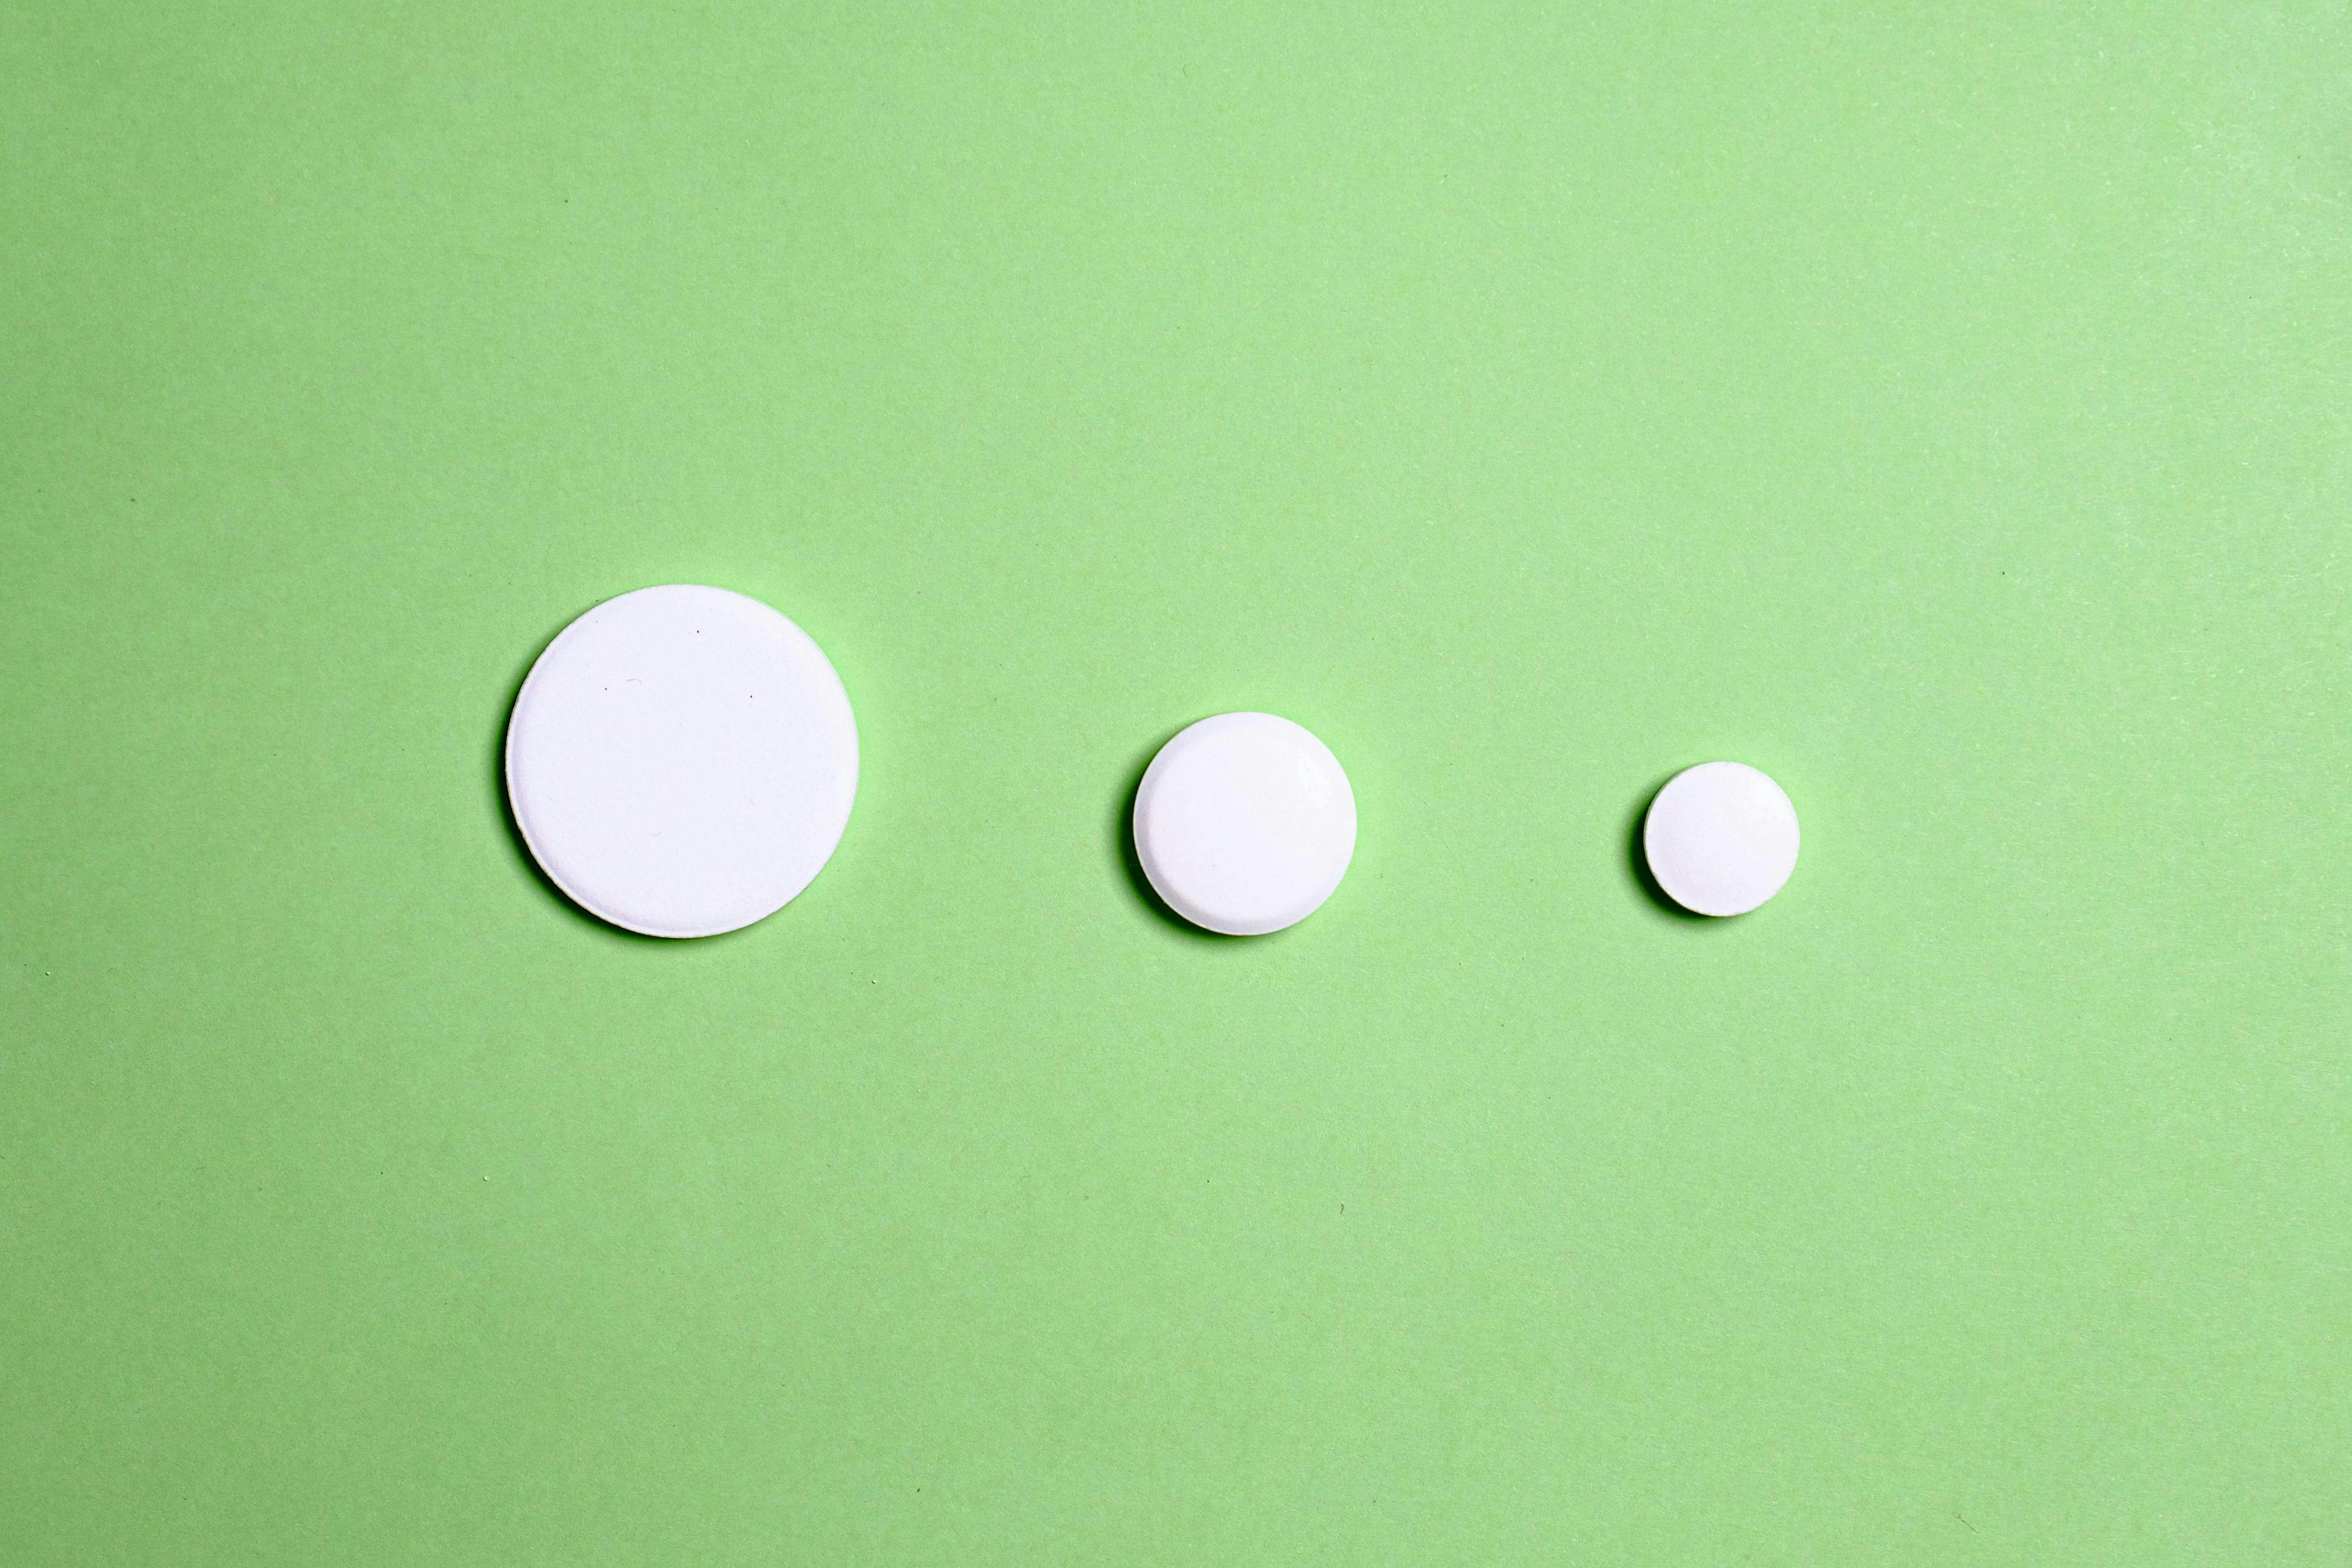 Three white, round, flat objects of varying sizes are arranged in a rightward diagonal line on a light green background.